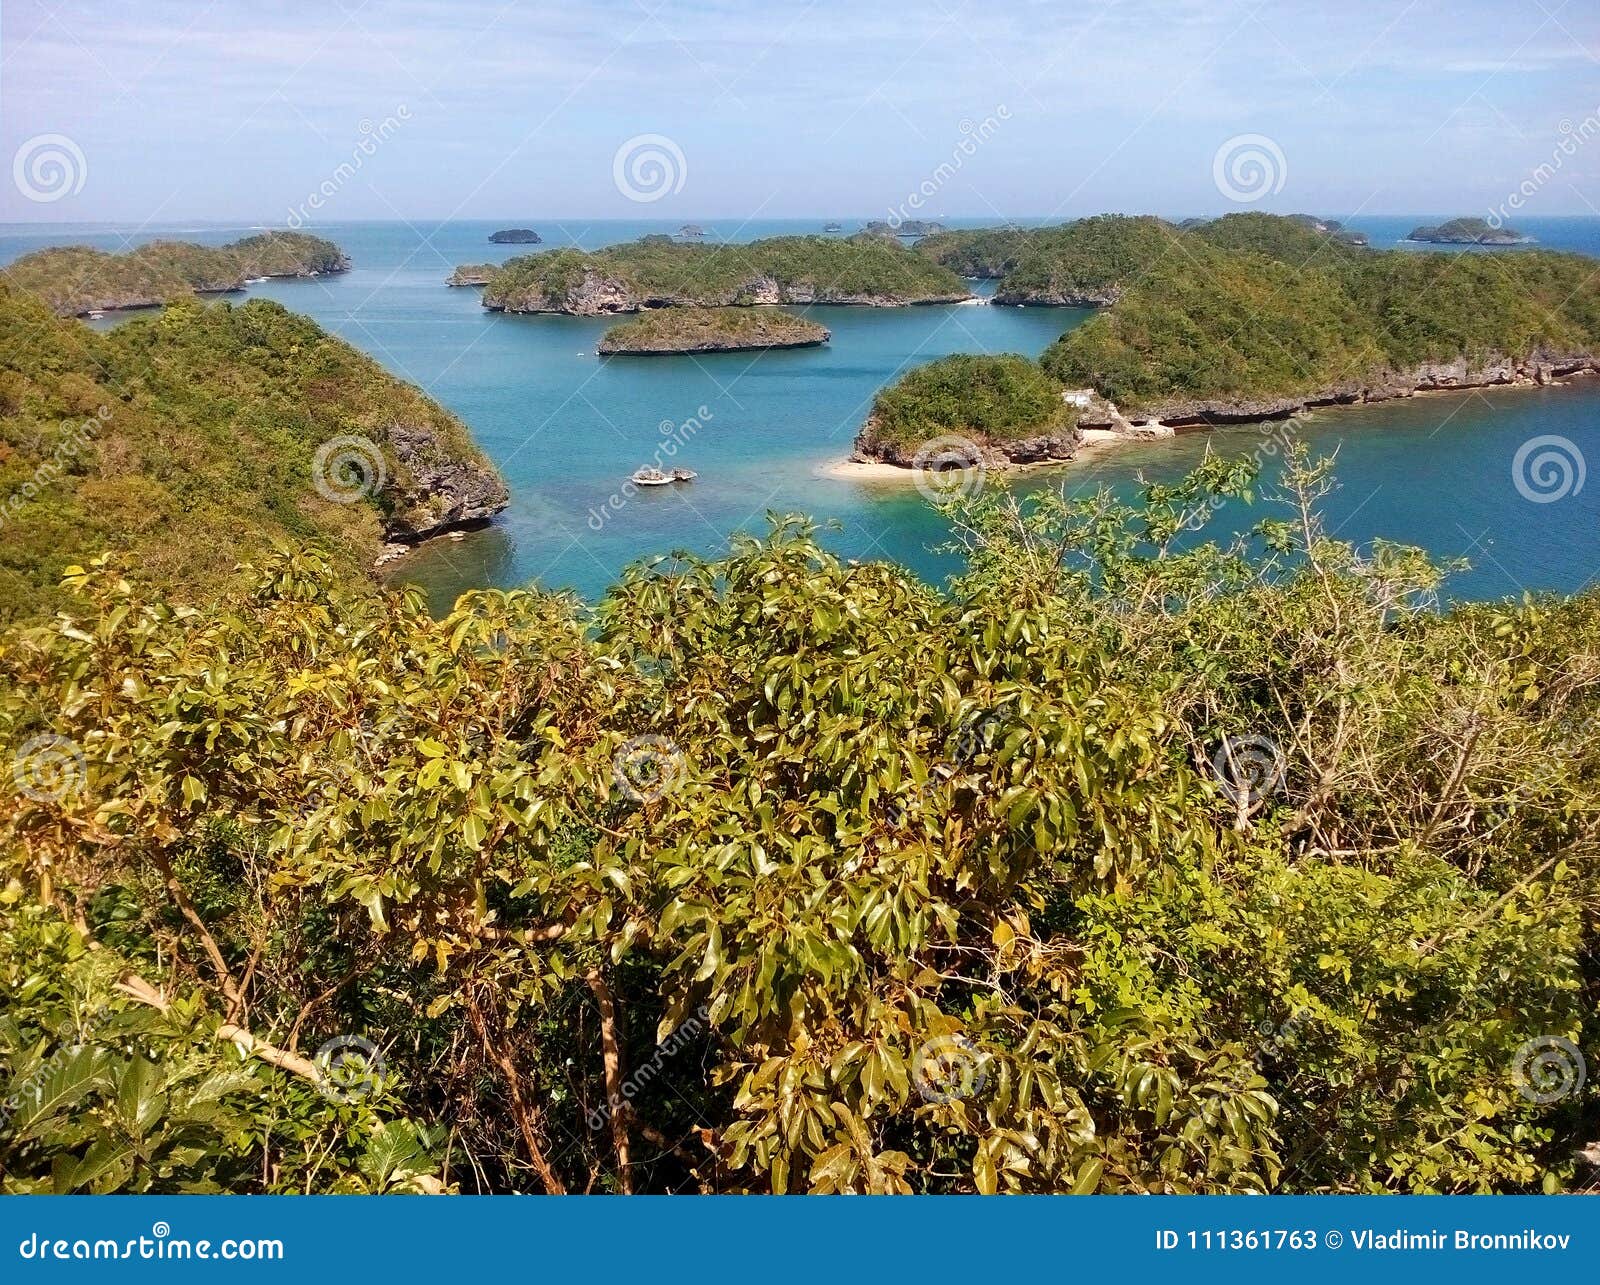 view from governor`s island viewing platform over northern part of hundreed islands archipelago, alaminos, philippinnes